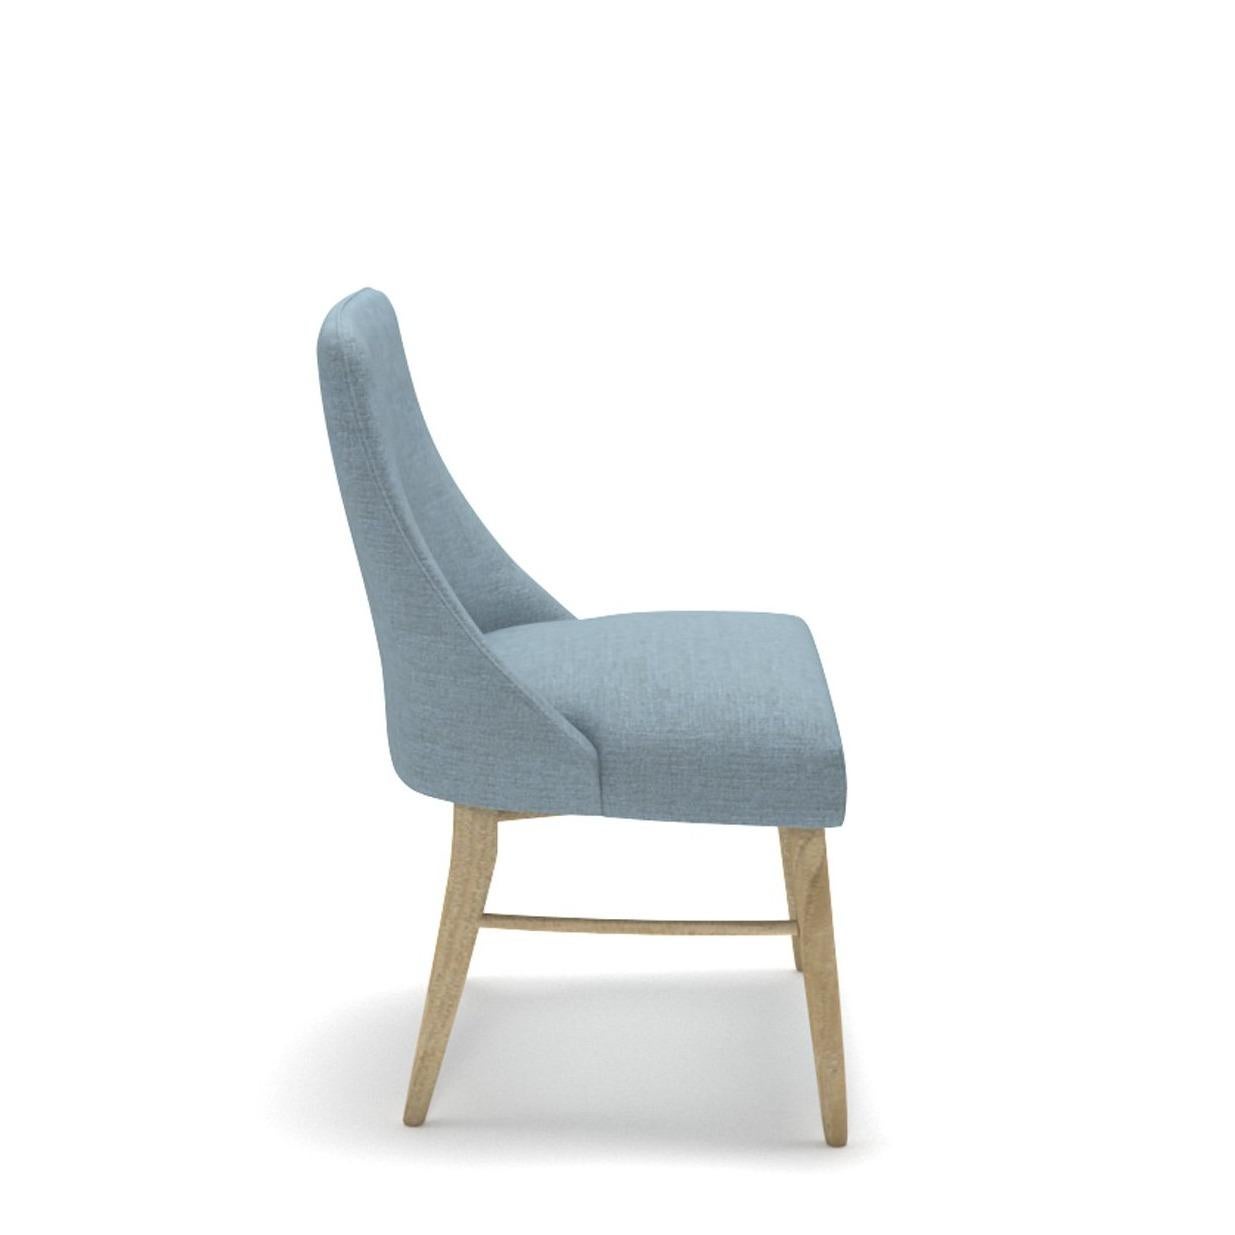 Sit in comfort with Chair-02, crafted with massive oak wood for long-lasting comfort and strength. You'll experience superior comfort in this chair, perfect for any living room.

All Tektōn pieces are made of natural massive wood.
Small variations